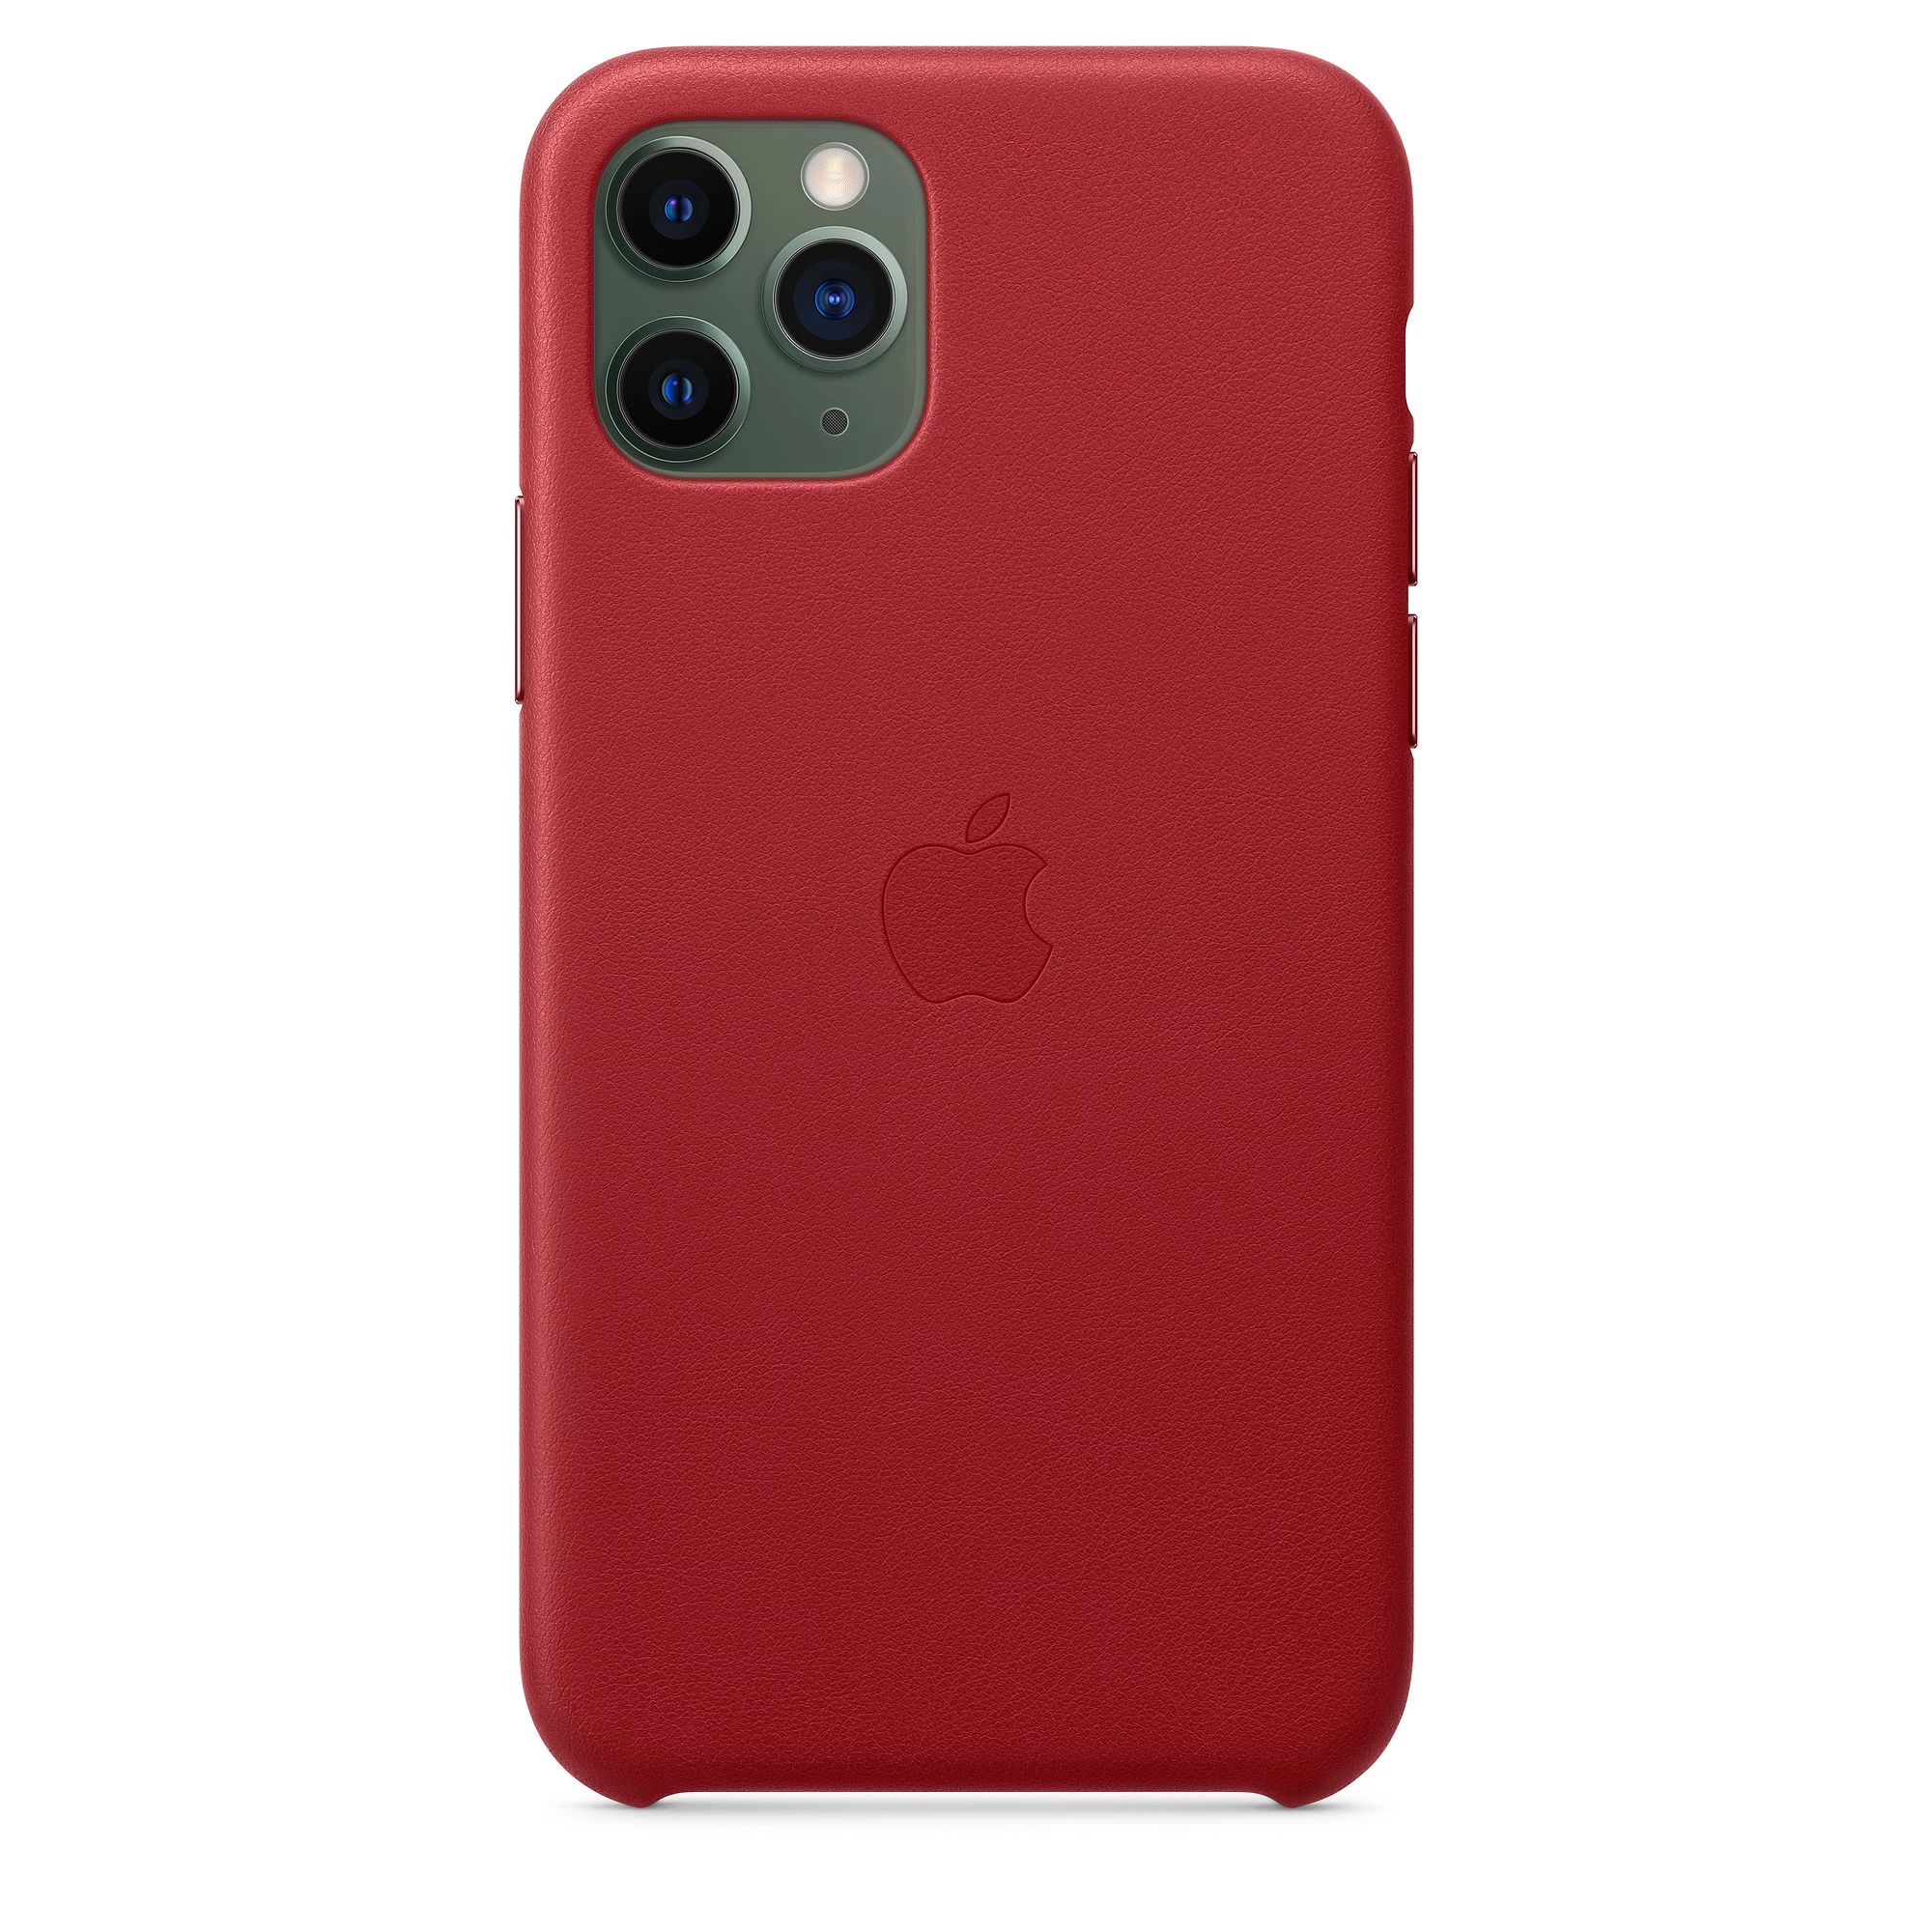 Apple iPhone 11 Pro Max Leather Case - PRODUCT RED (MX0F2)